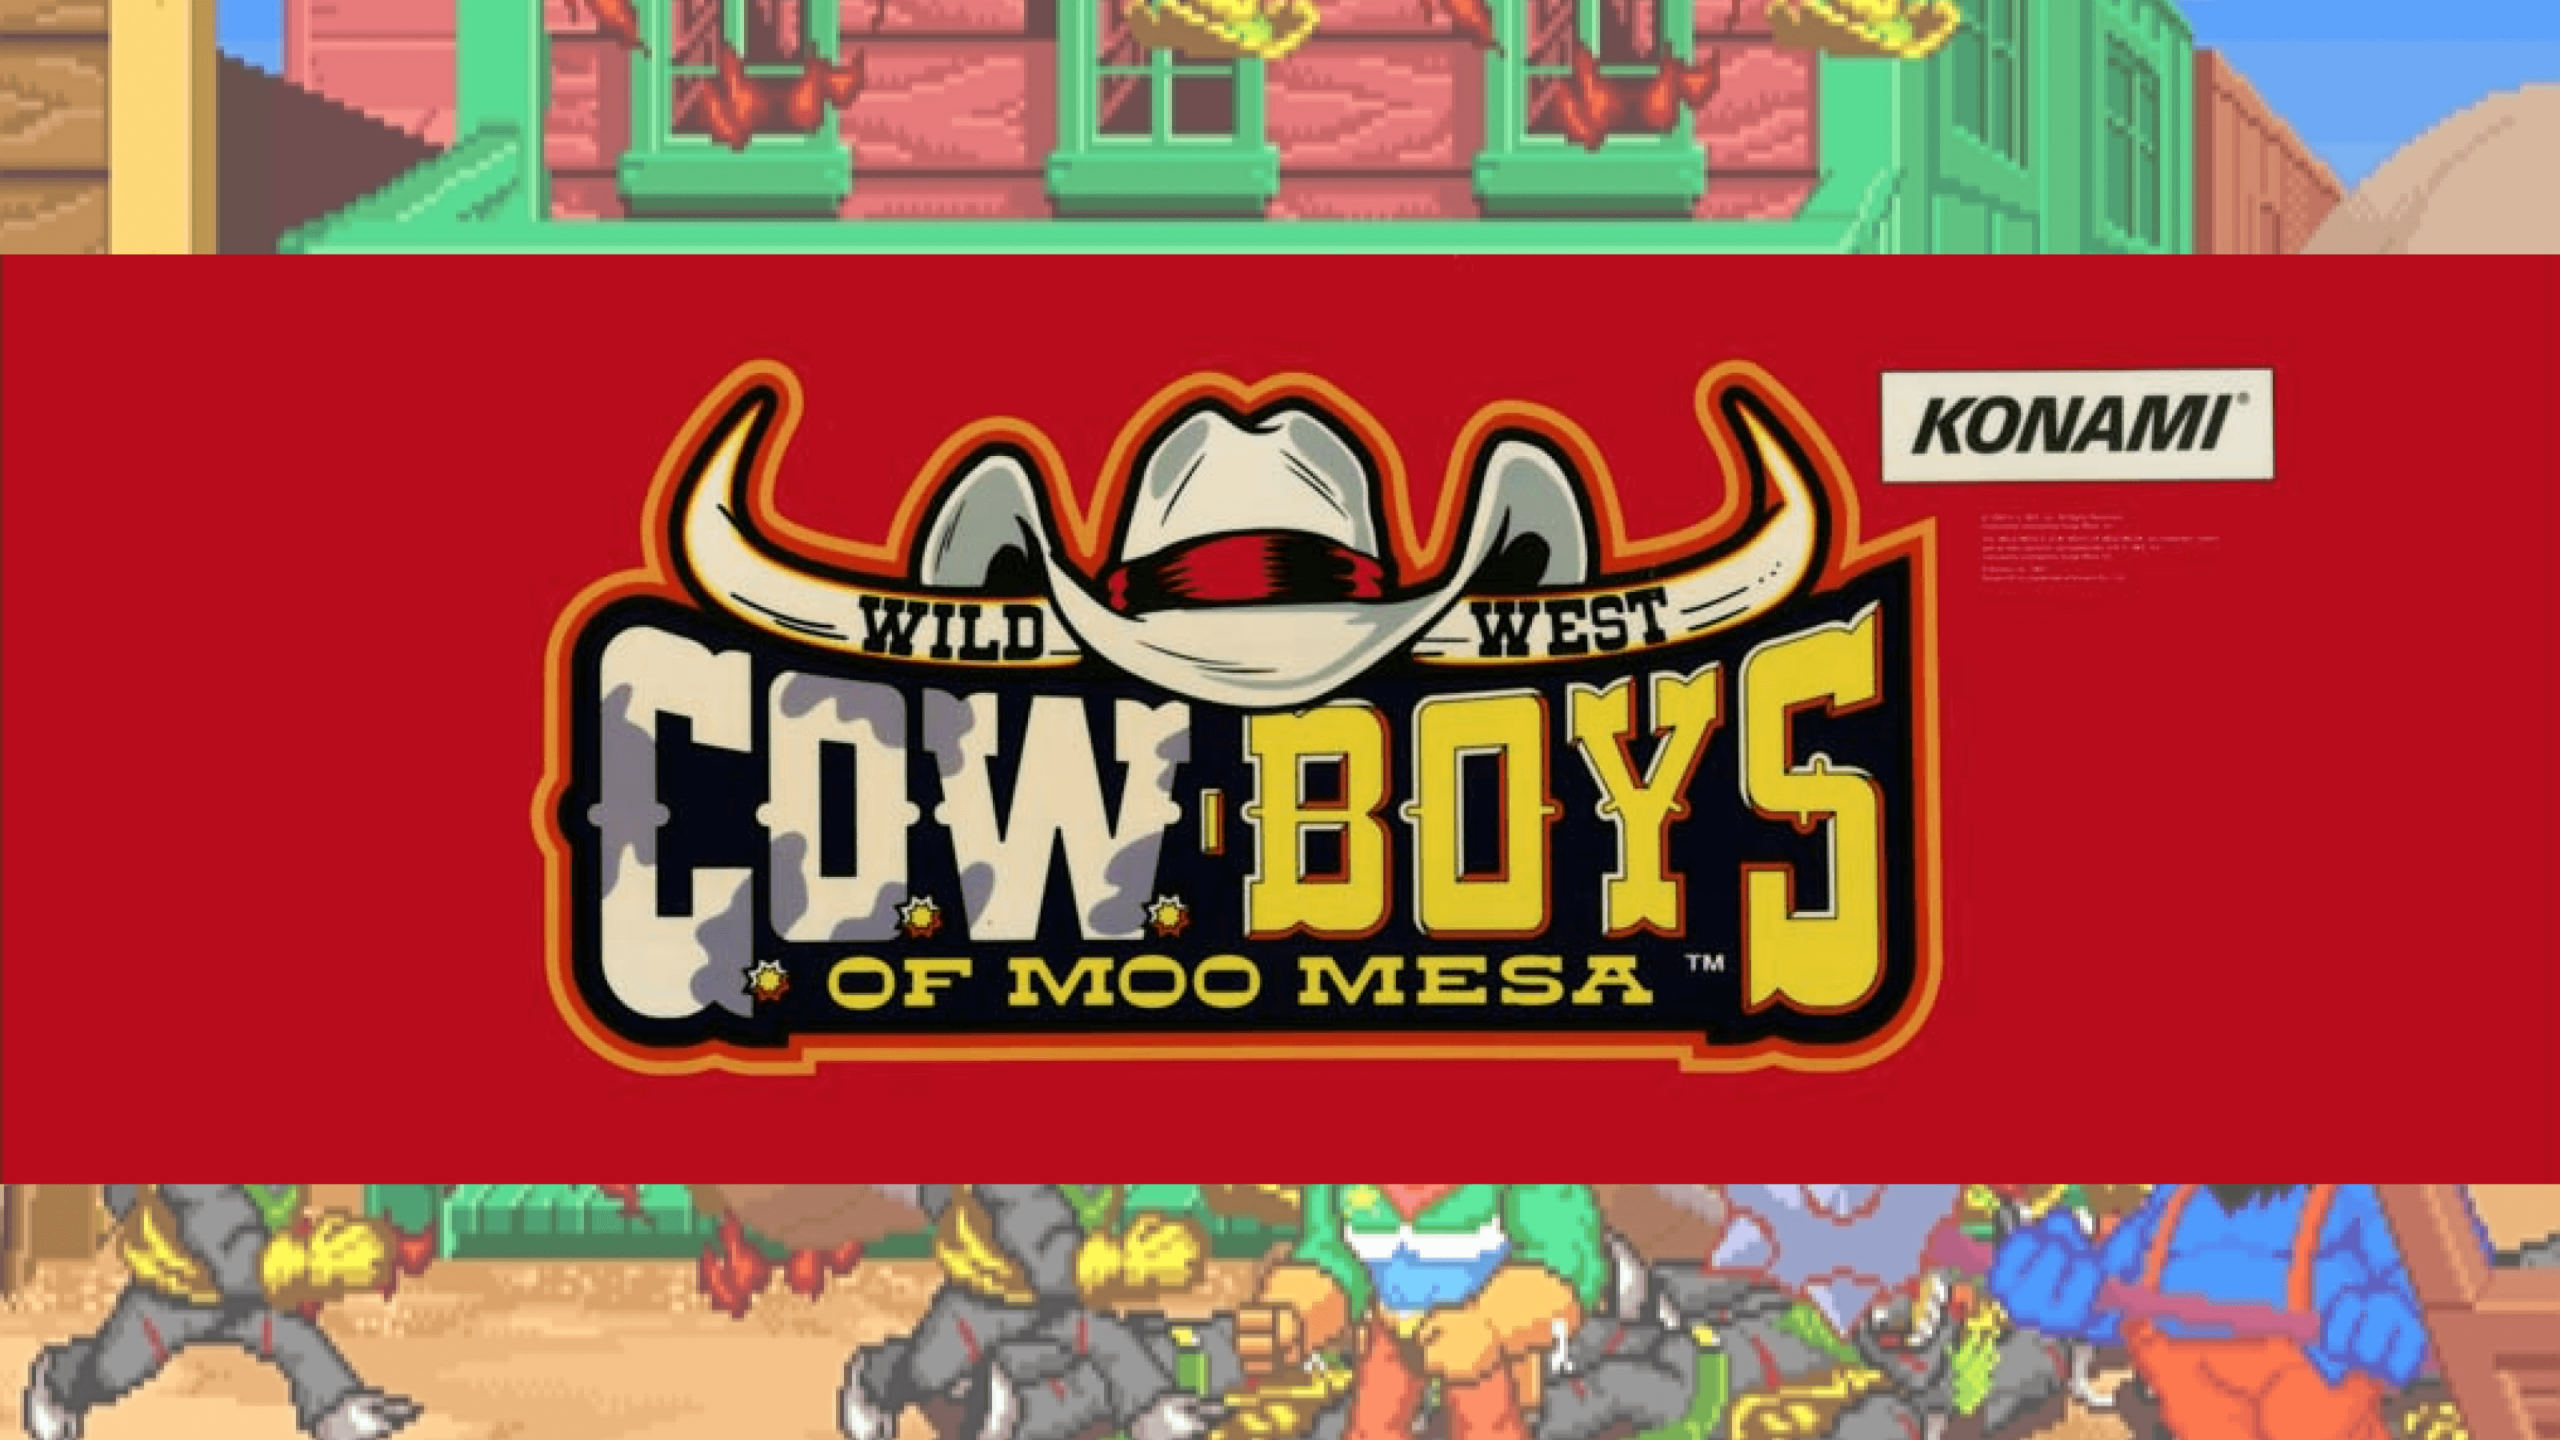 You are currently viewing A World of Games: Wild West Cowboys of Moo Mesa